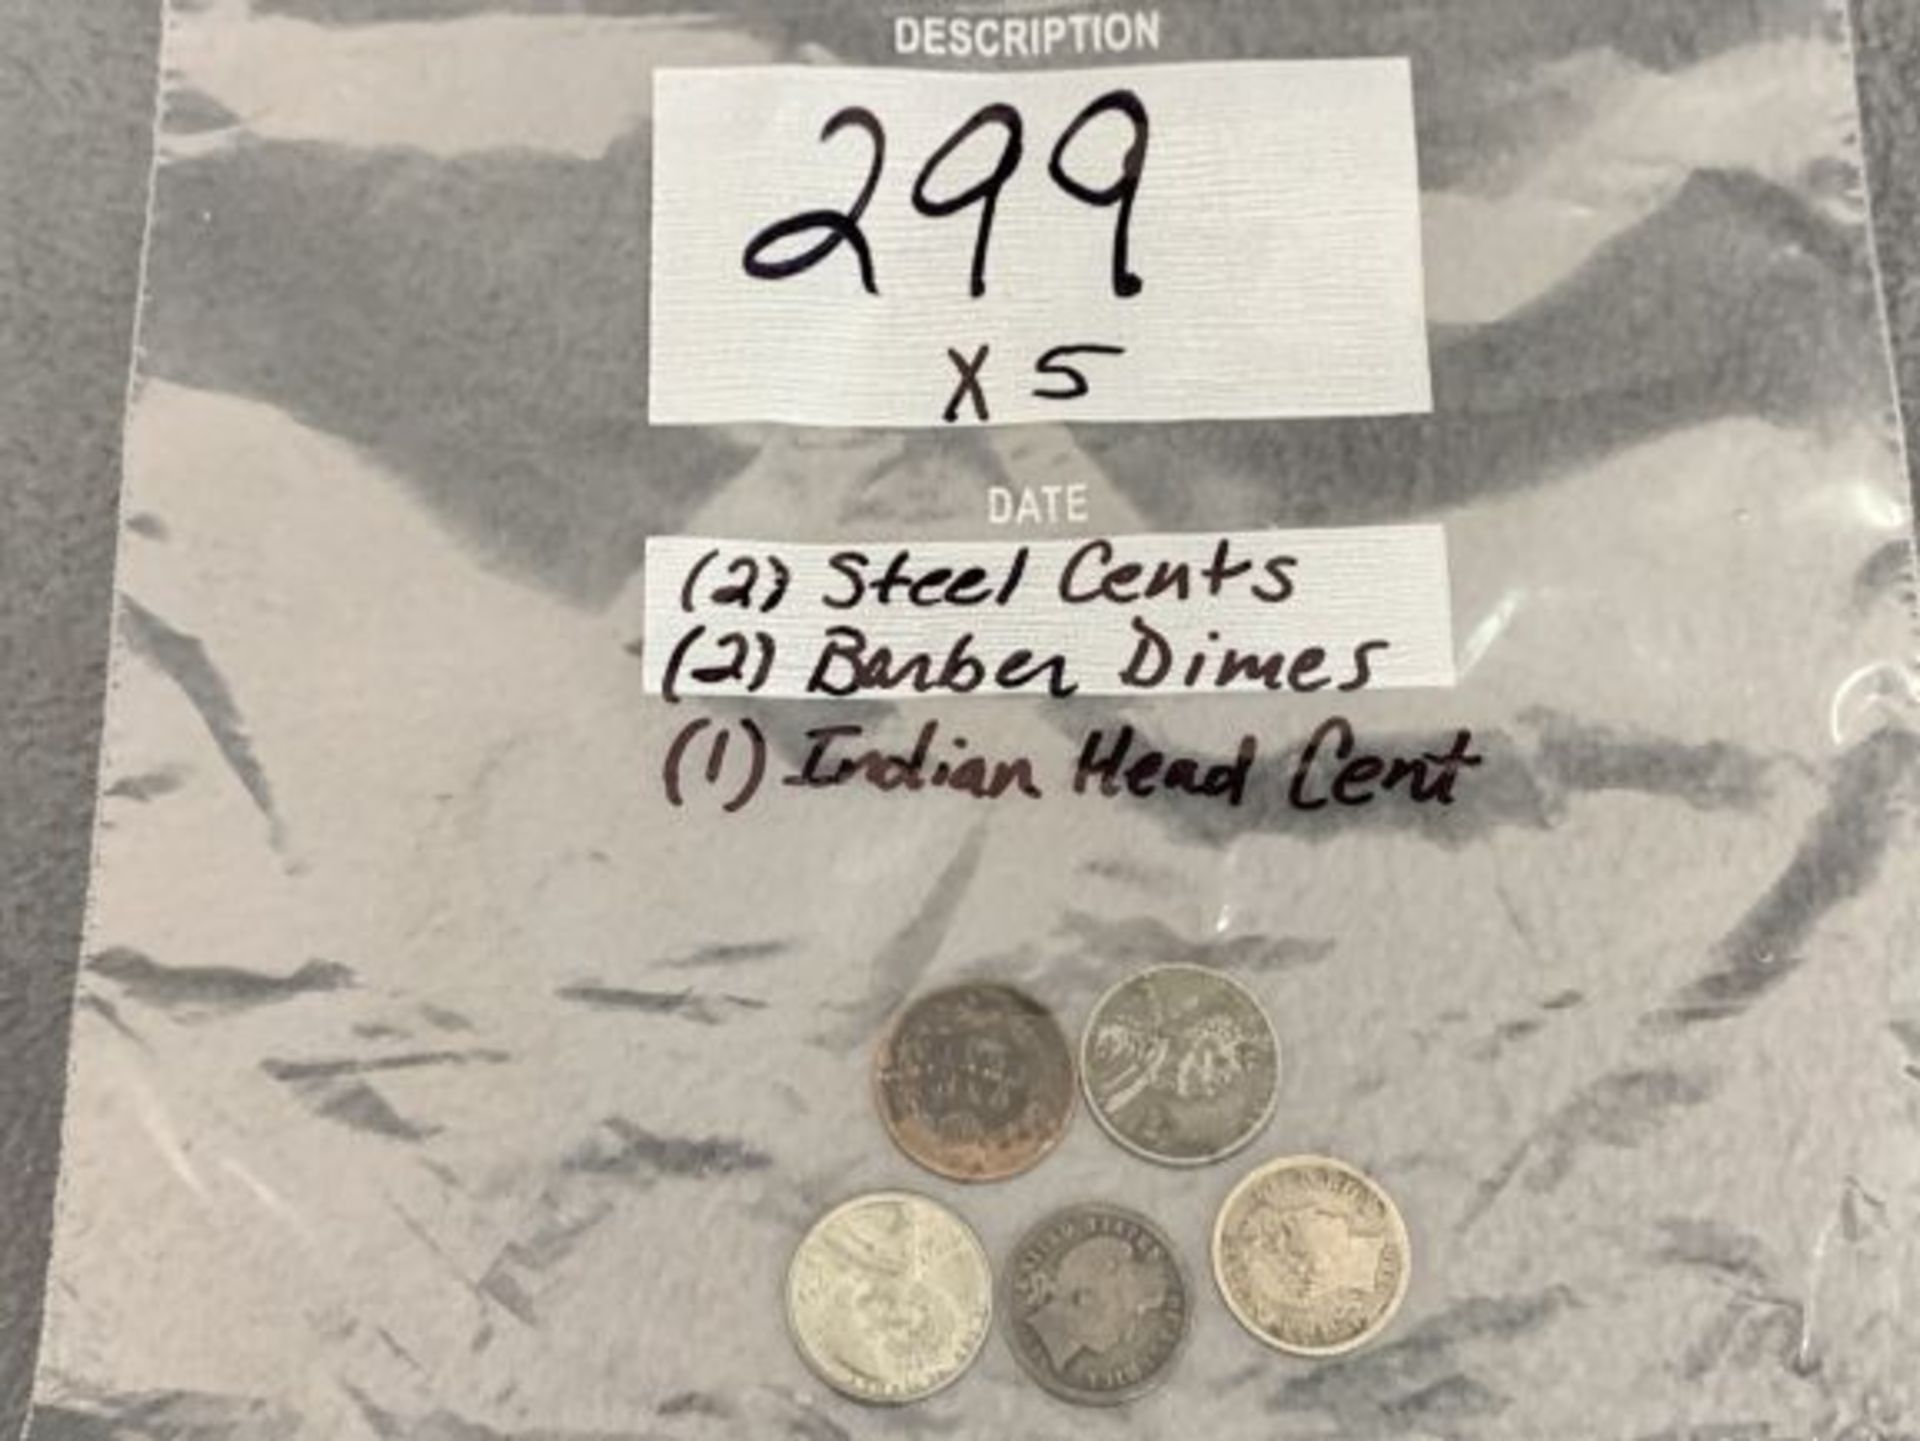 299. 2 Steel Cents, 2 Barber Dimes, 1 Indian Head Cent (x5)